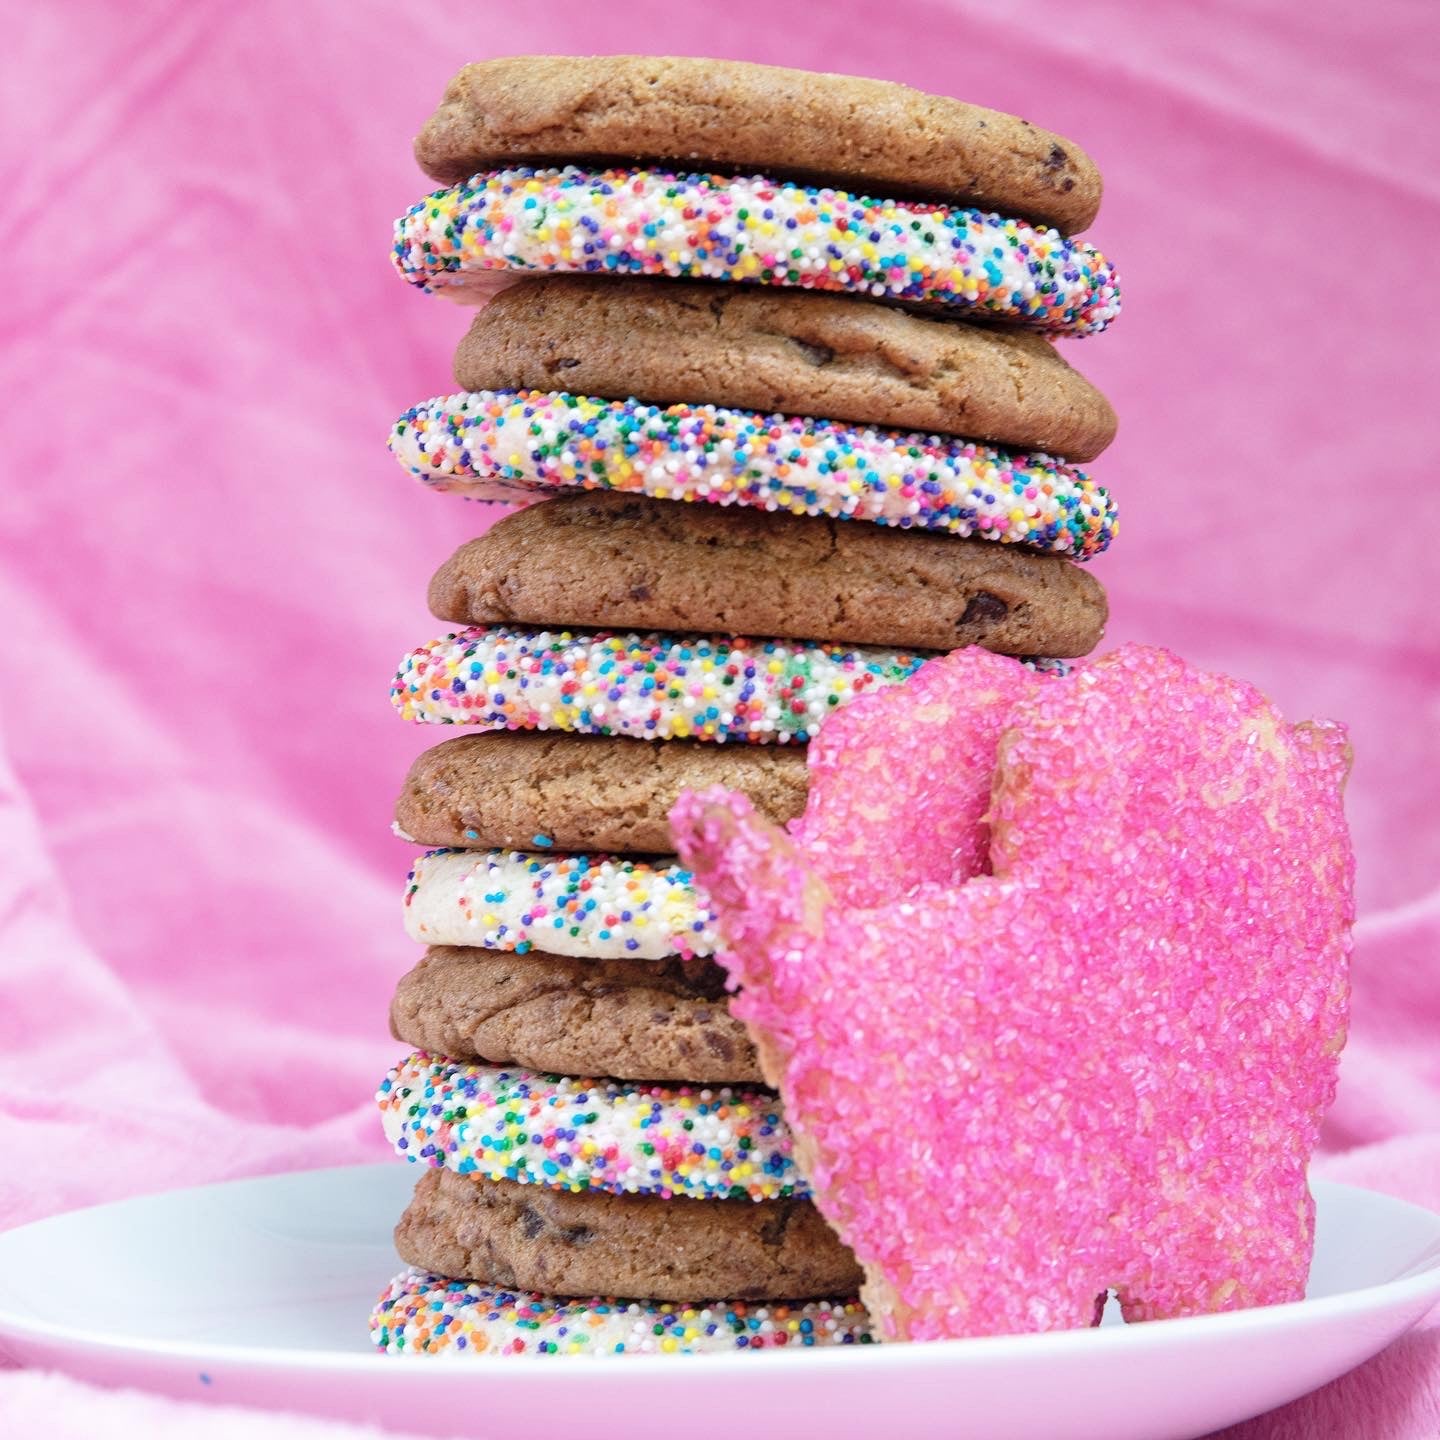 🎀 Assorted Cookies - It's a Girl 🎀